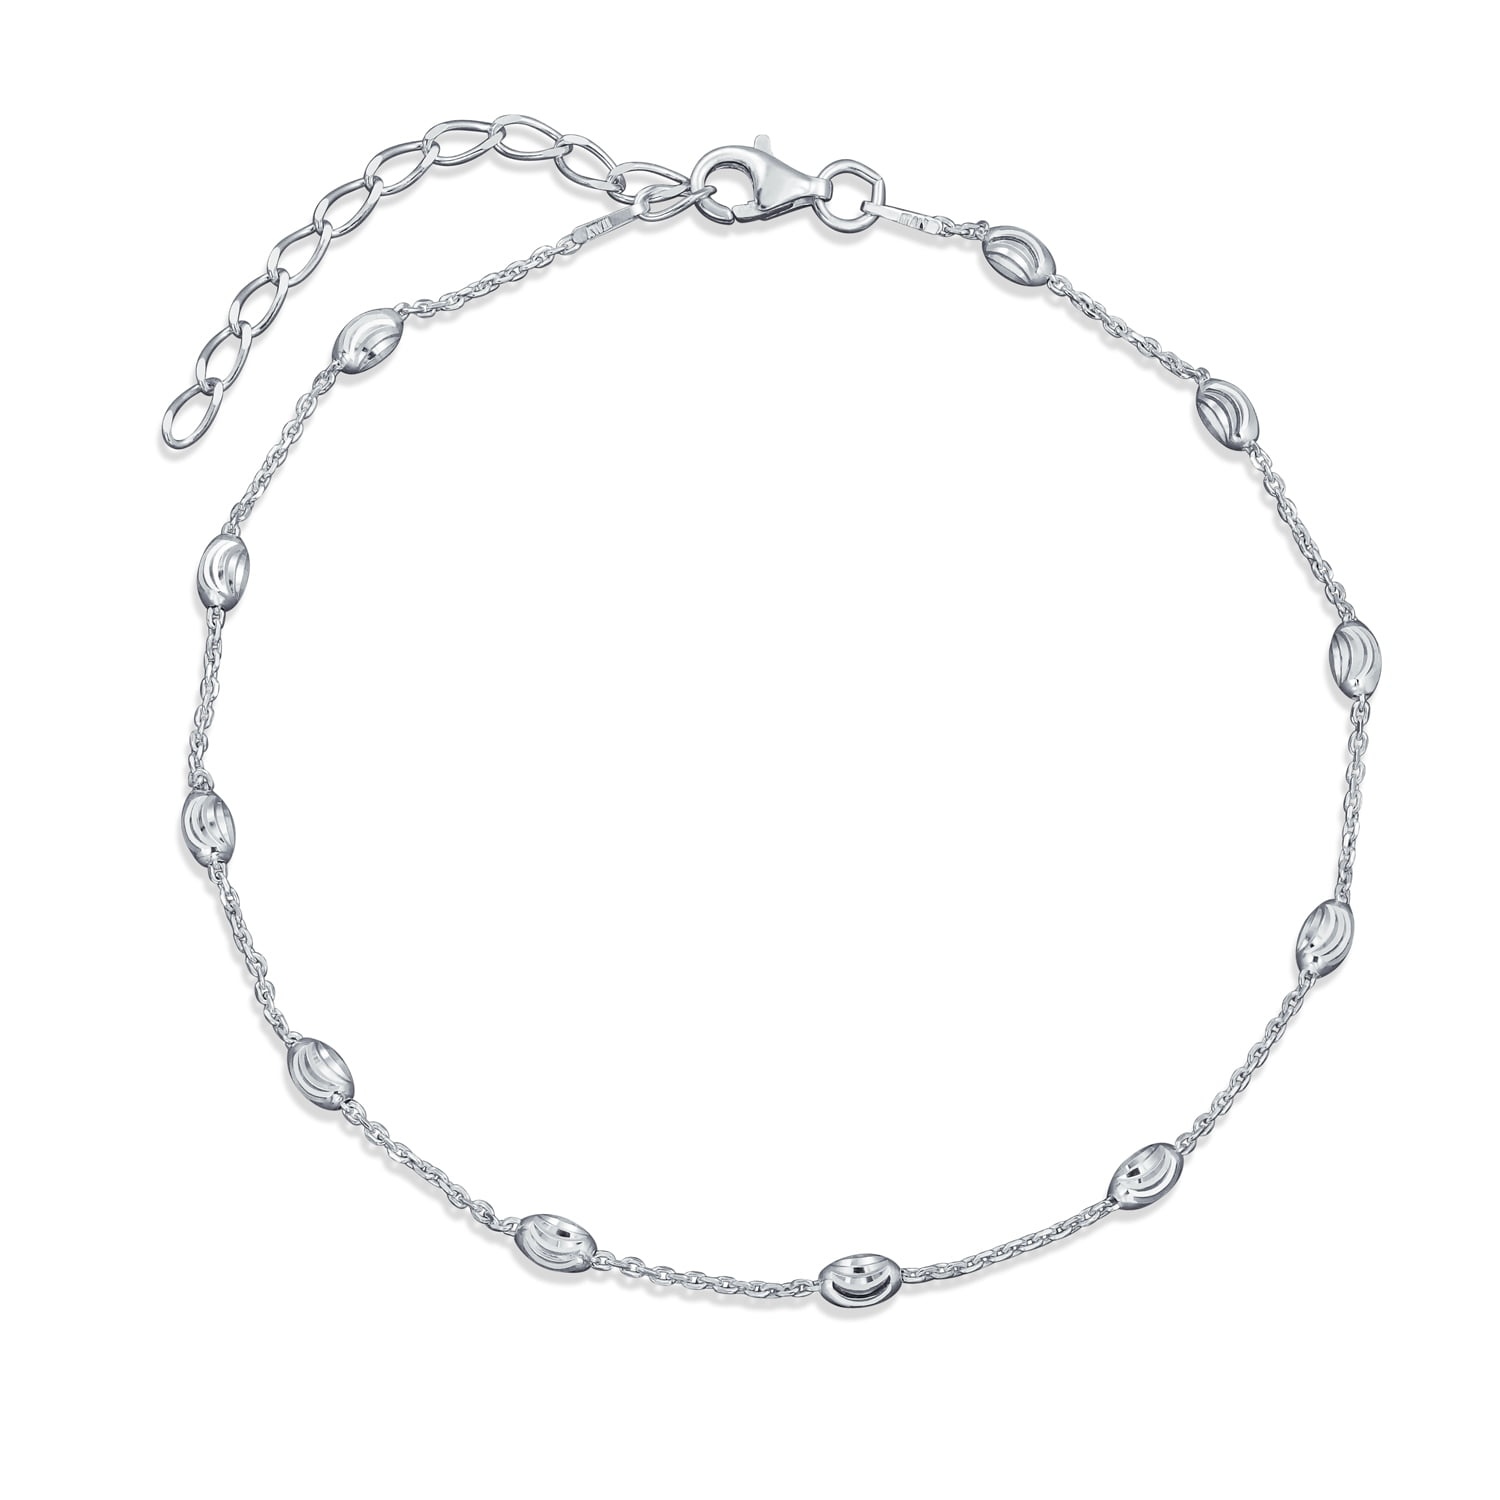 Bling Jewelry Diamond-Cut Oval Beads Chain Anklet .925 Sterling Silver